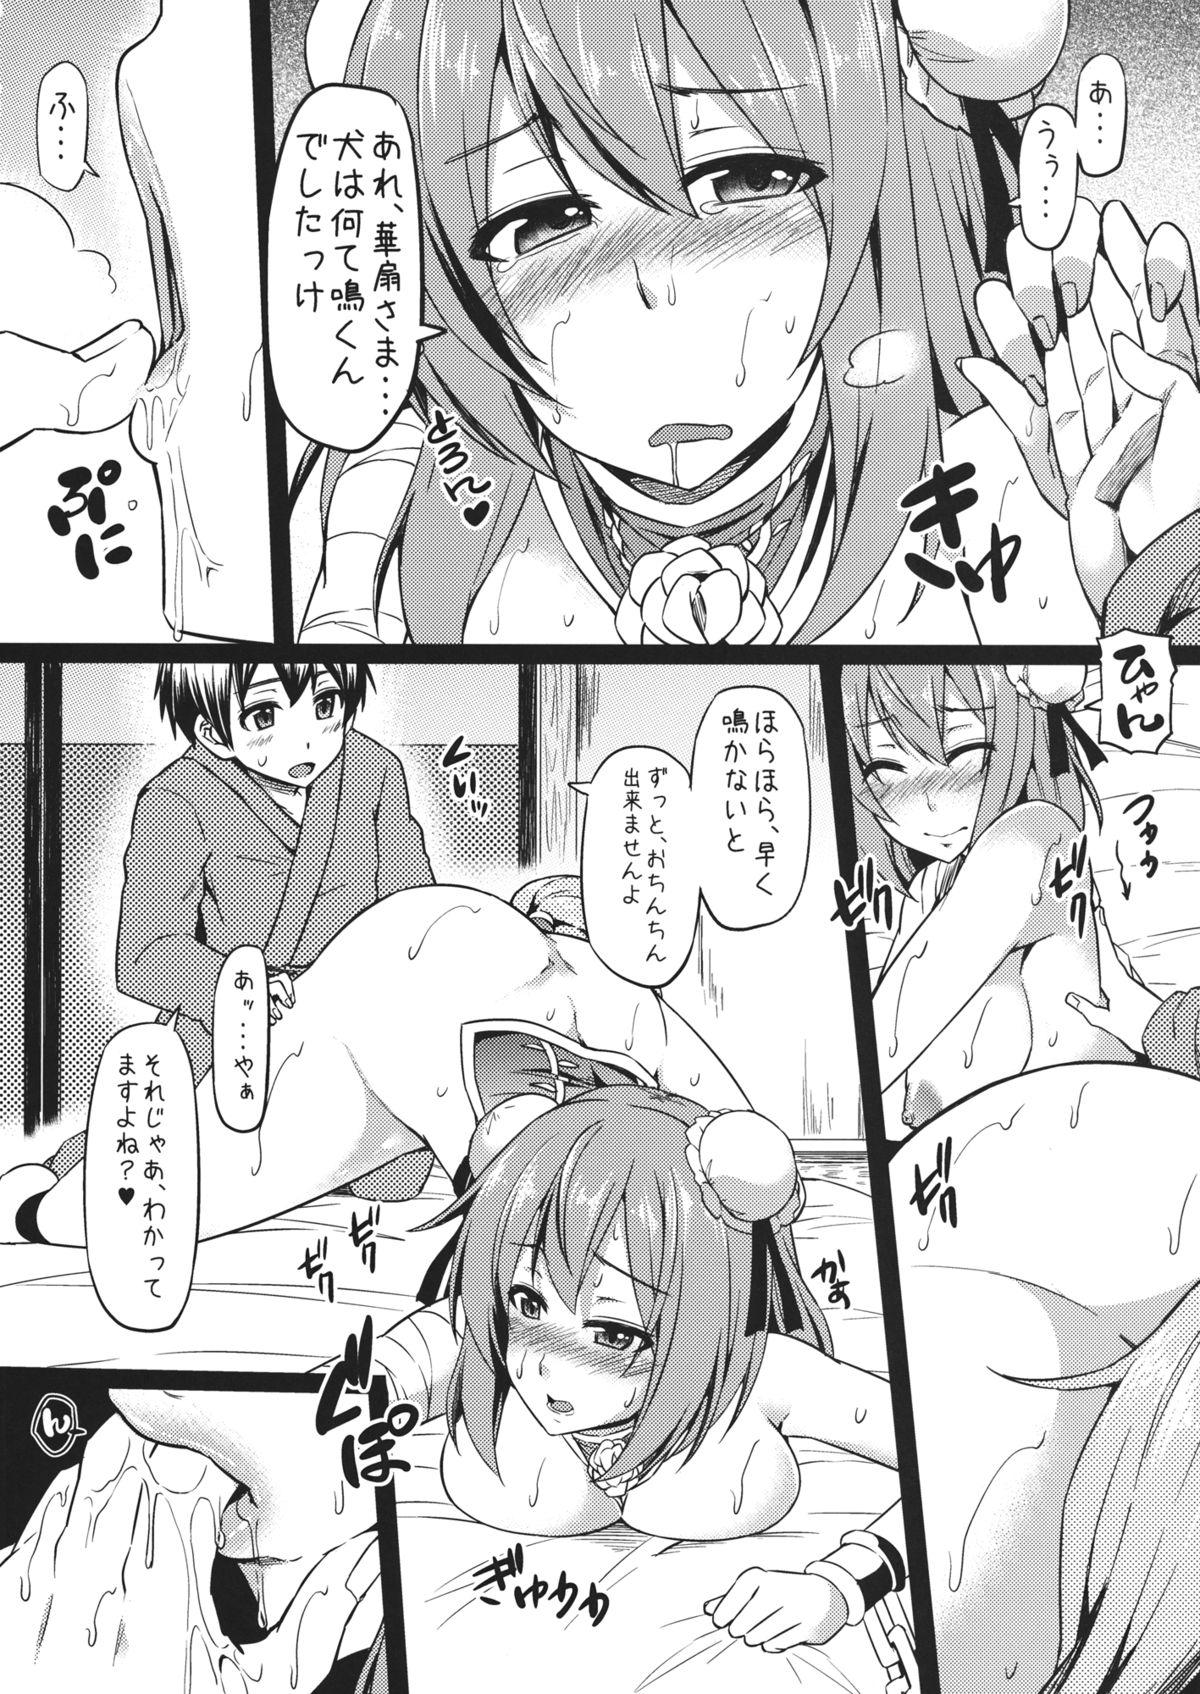 Pussysex DogLife2 - Touhou project Sexcams - Page 3